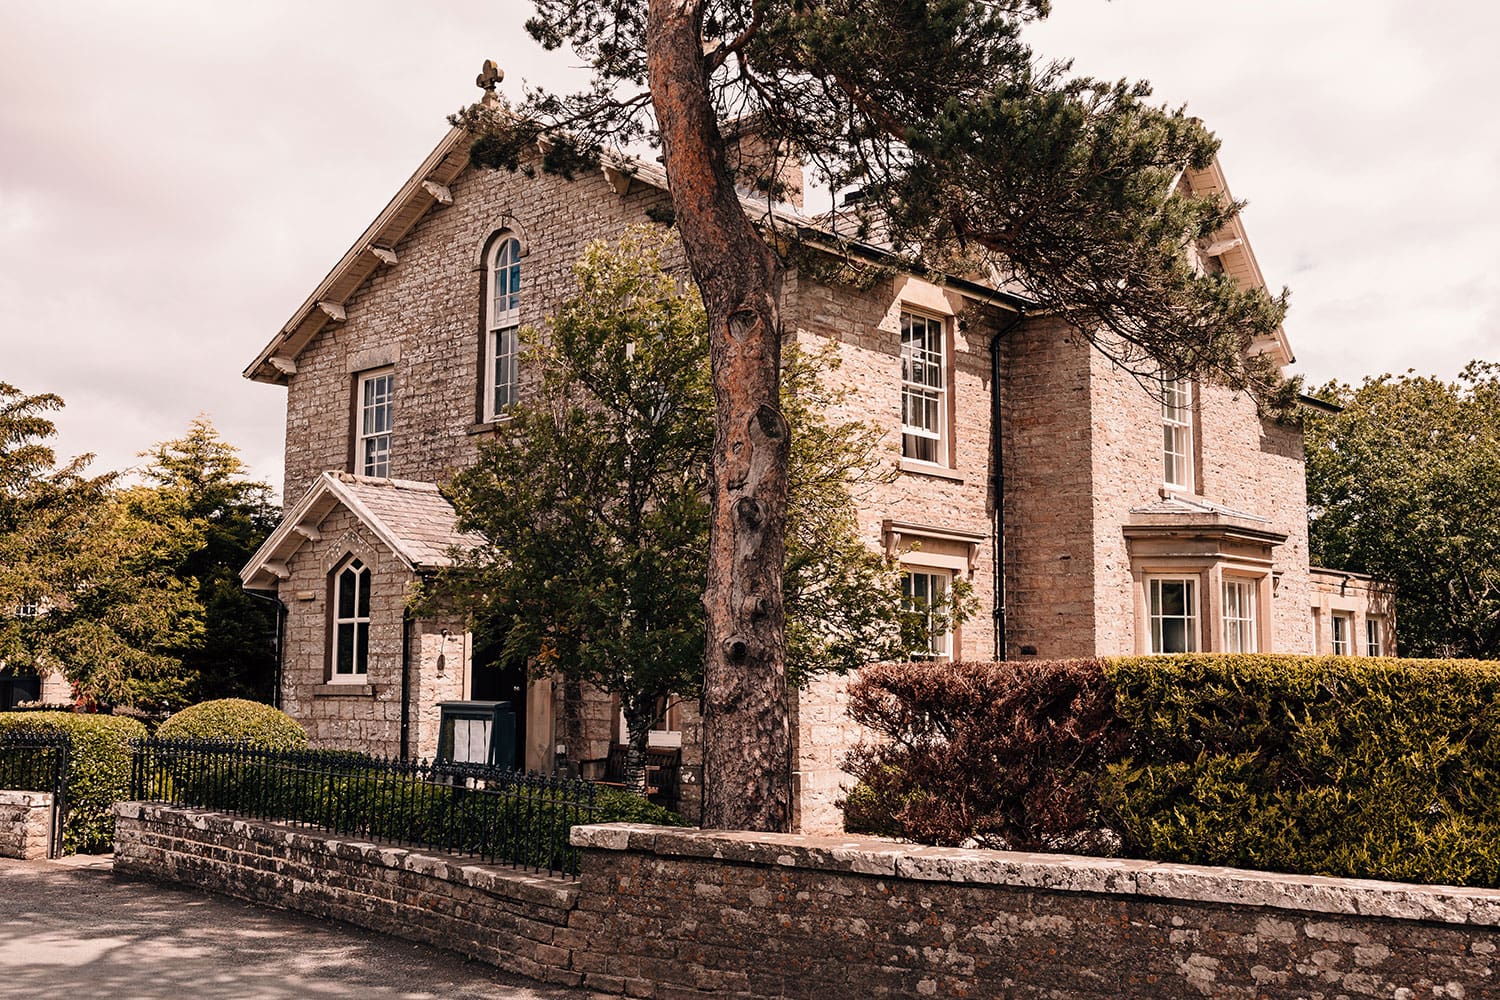 Our favourite small wedding venues in Yorkshire - Yorebridge House in the Yorkshire Dales